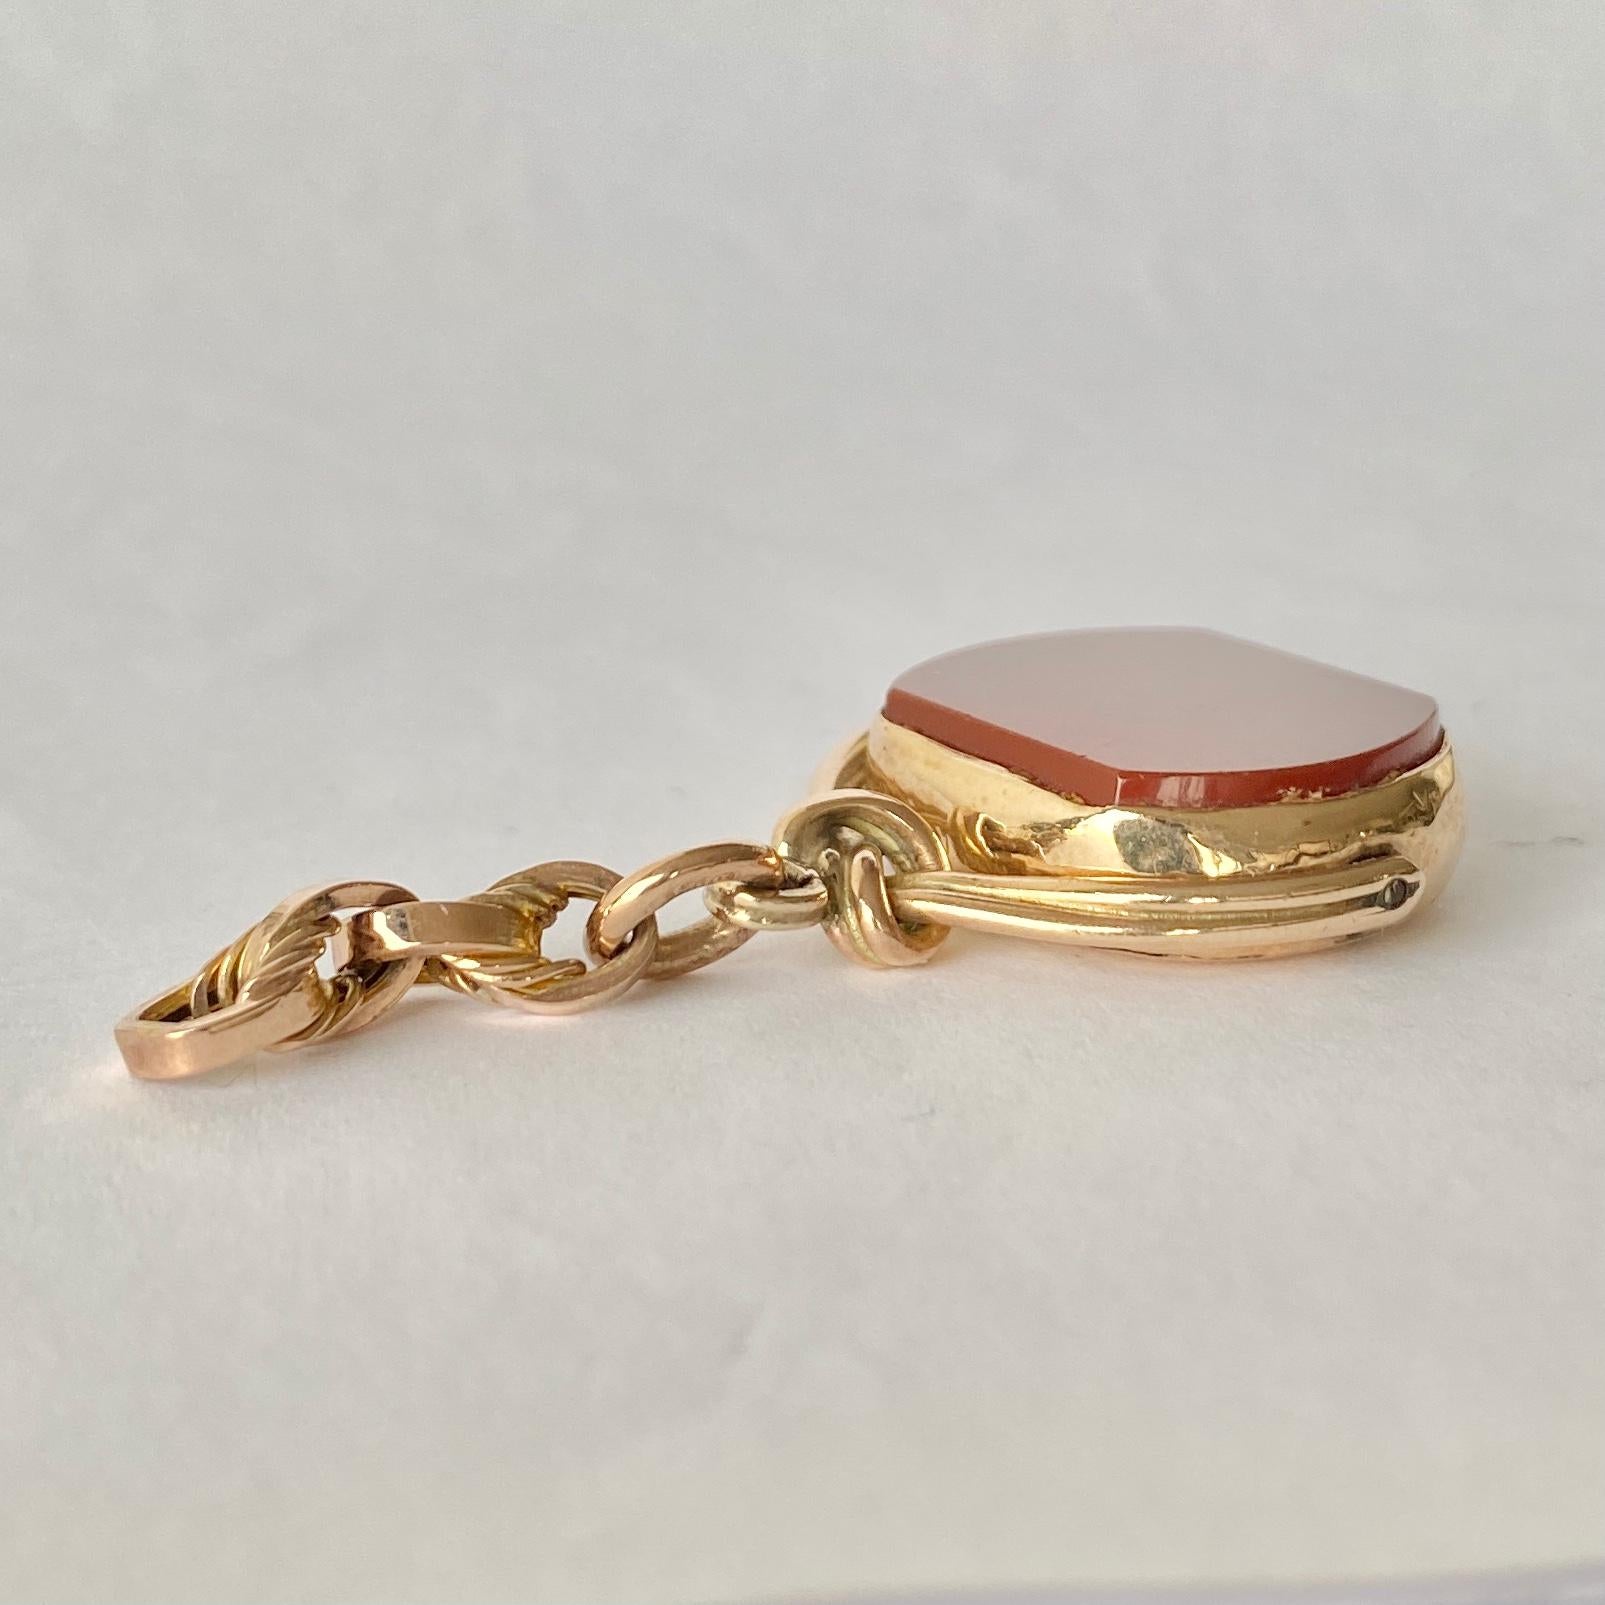 This classic 9ct gold fob holds a carnelian stone which is backed with glossy gold! The frame is modelled as if it is twisted and knotted rope.

Stone Dimensions: 21x16mm 

Weight: 9.2g



